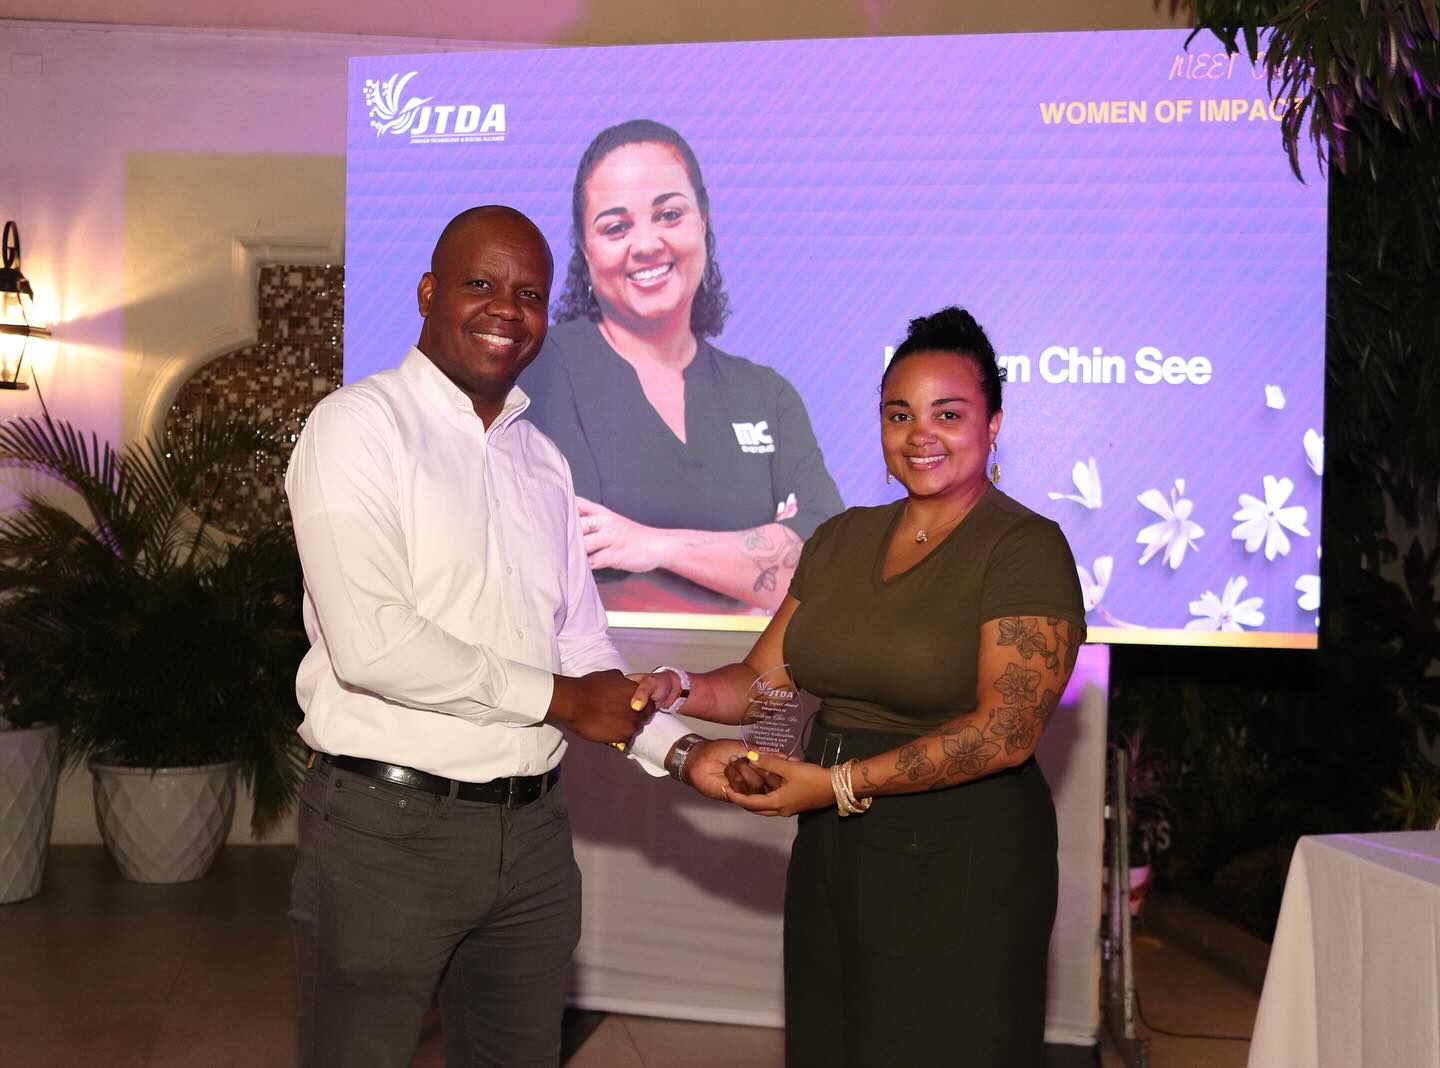 Almando Cox, president, Jamaica Digital and Technology Alliance (JTDA), presents the Woman of Impact Award in STEAM in Jamaica to Kathryn Chin See, Product Manager, BizPay, at MC Systems, for her contribution and work in the Jamaican tech space over the year.